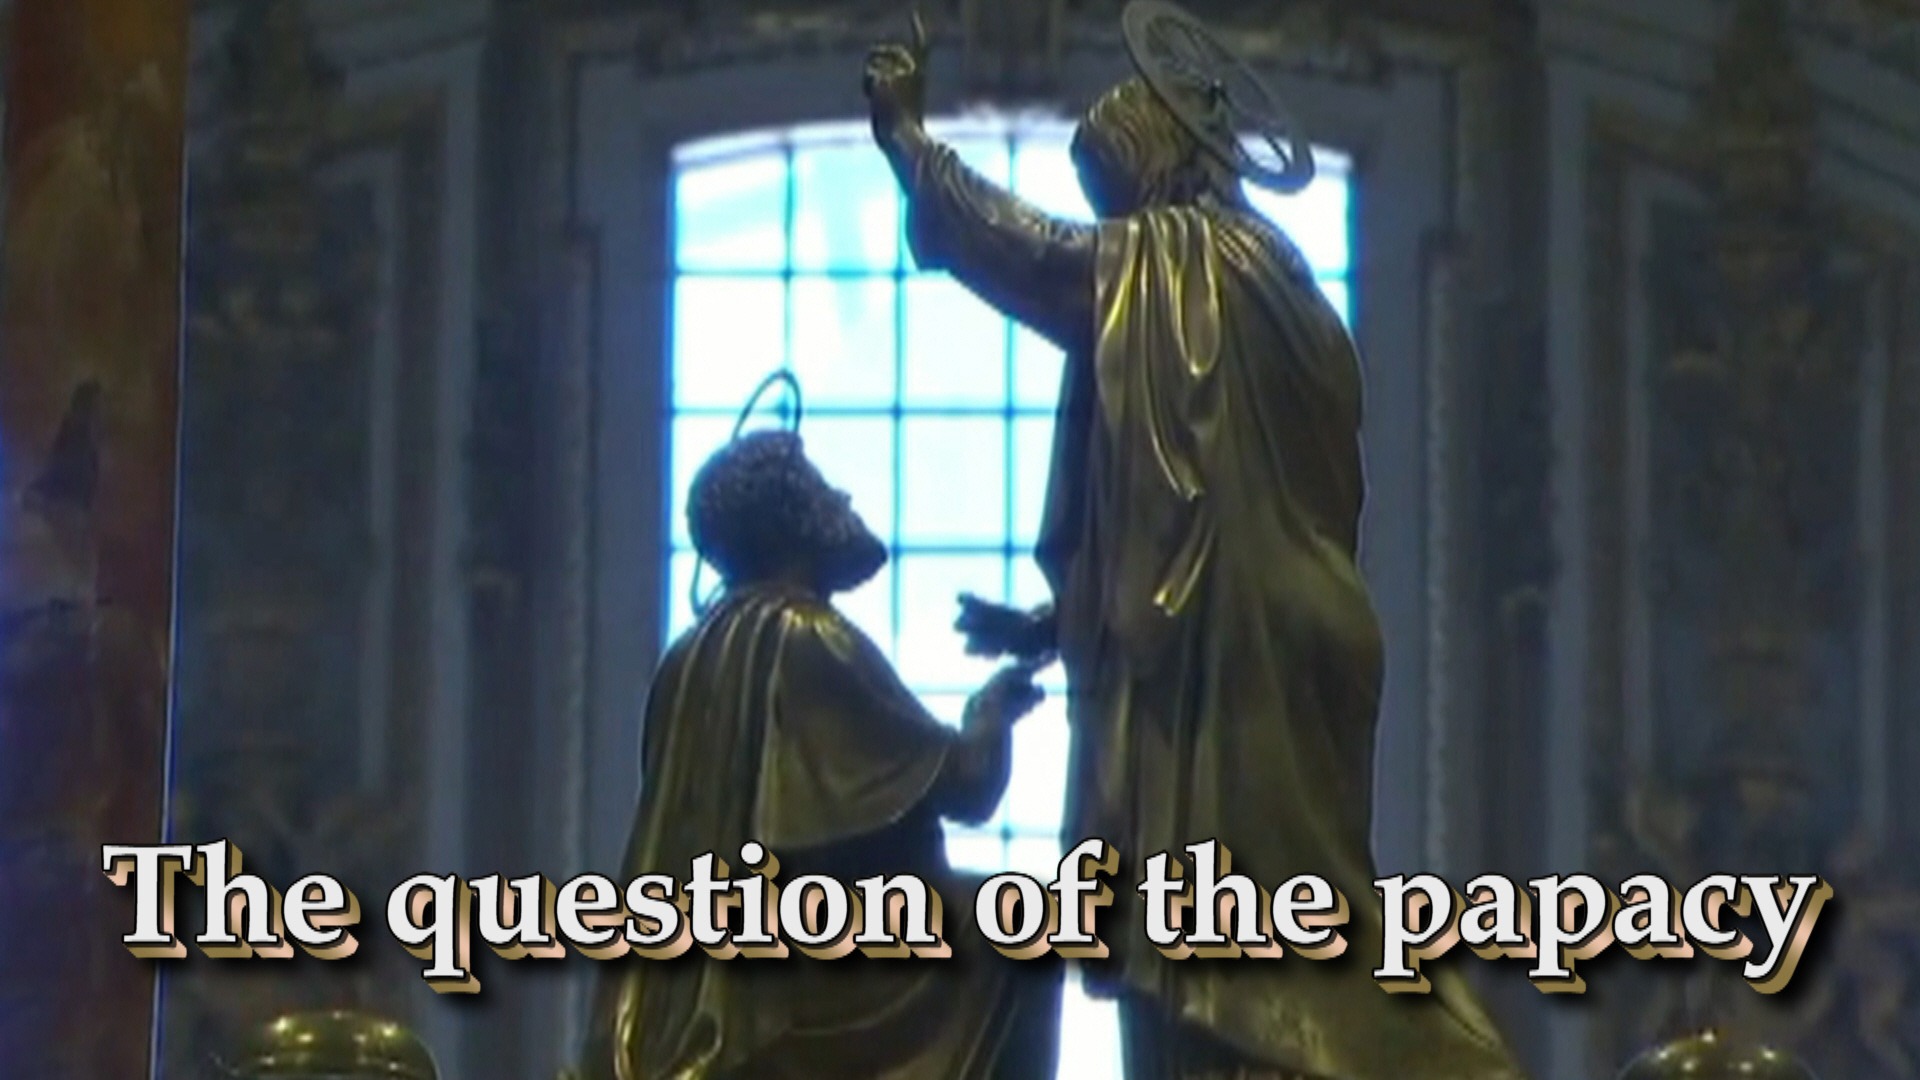 The question of the papacy